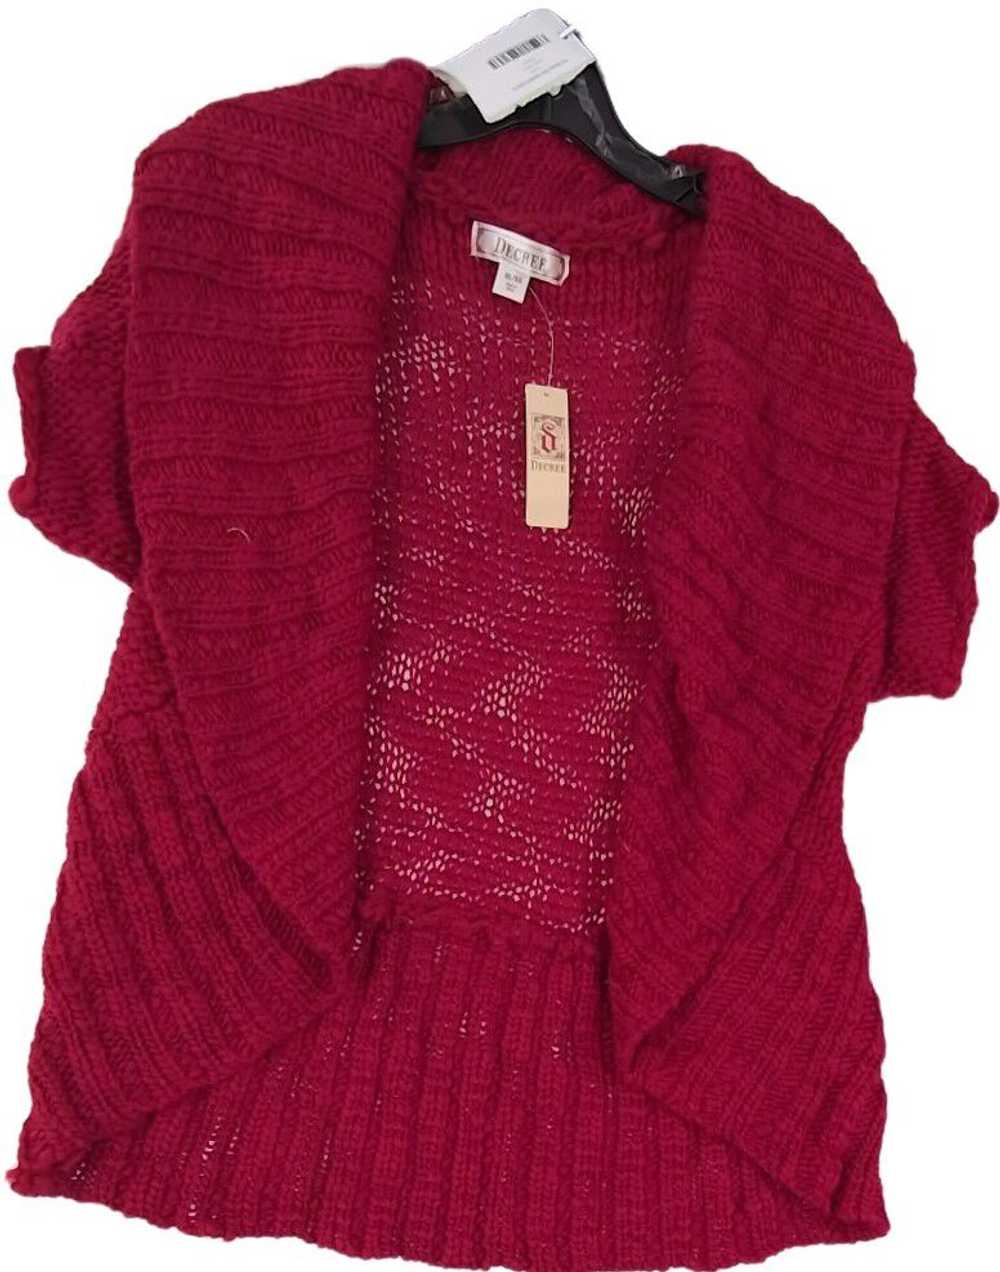 Decree Short Sleeve Knitted Cardigan Sweater Wome… - image 2